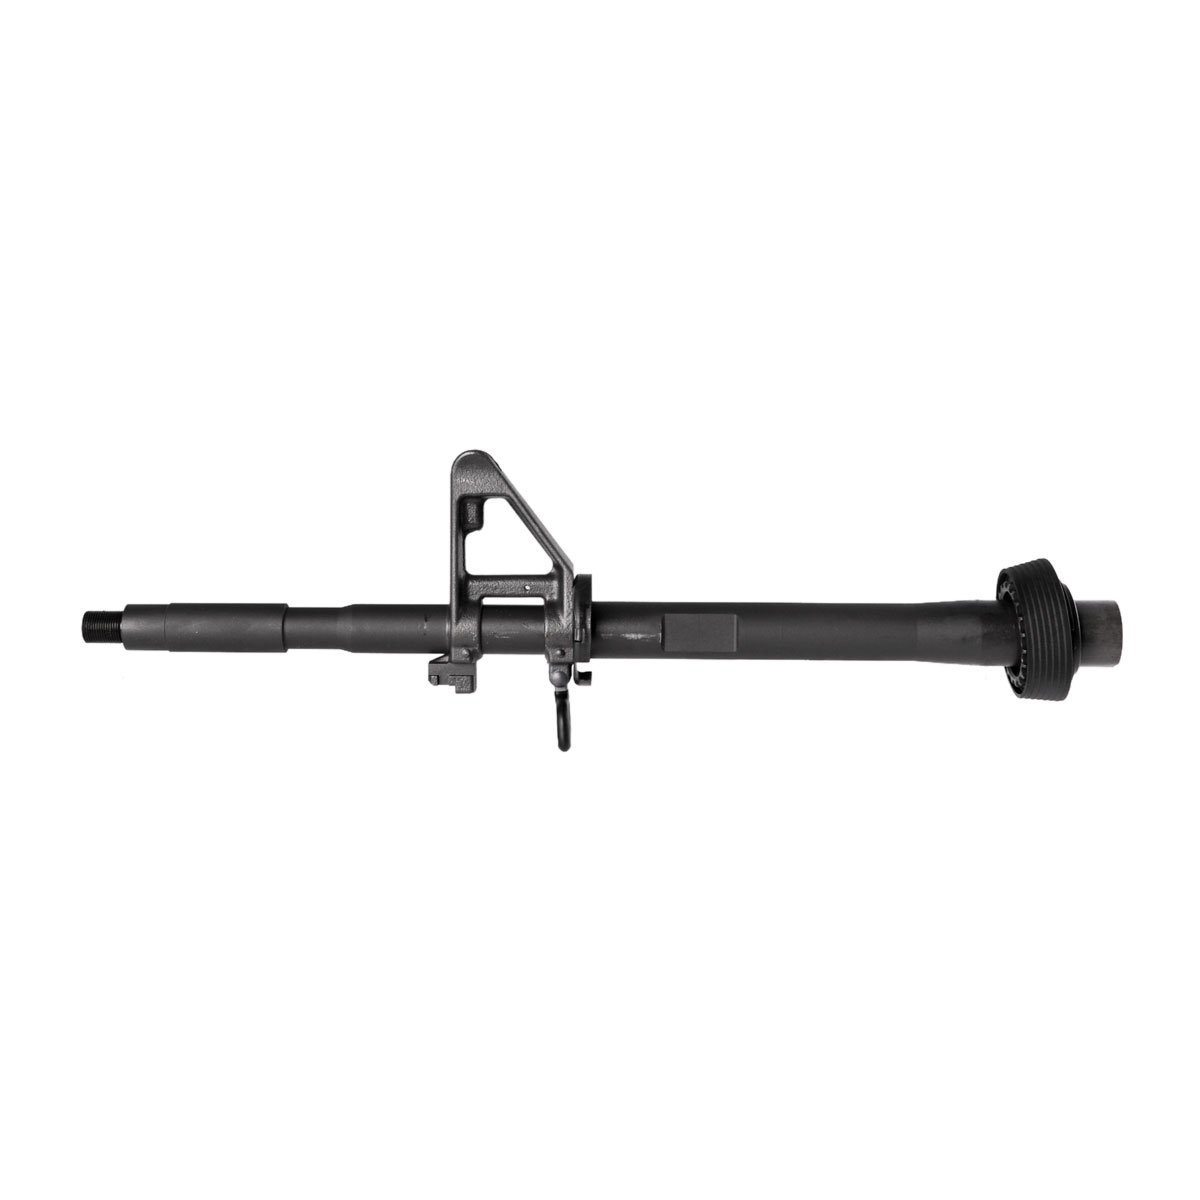 BROWNELLS AR-15 CHROME LINED GOVERNMENT BARREL ASSEMBLIES